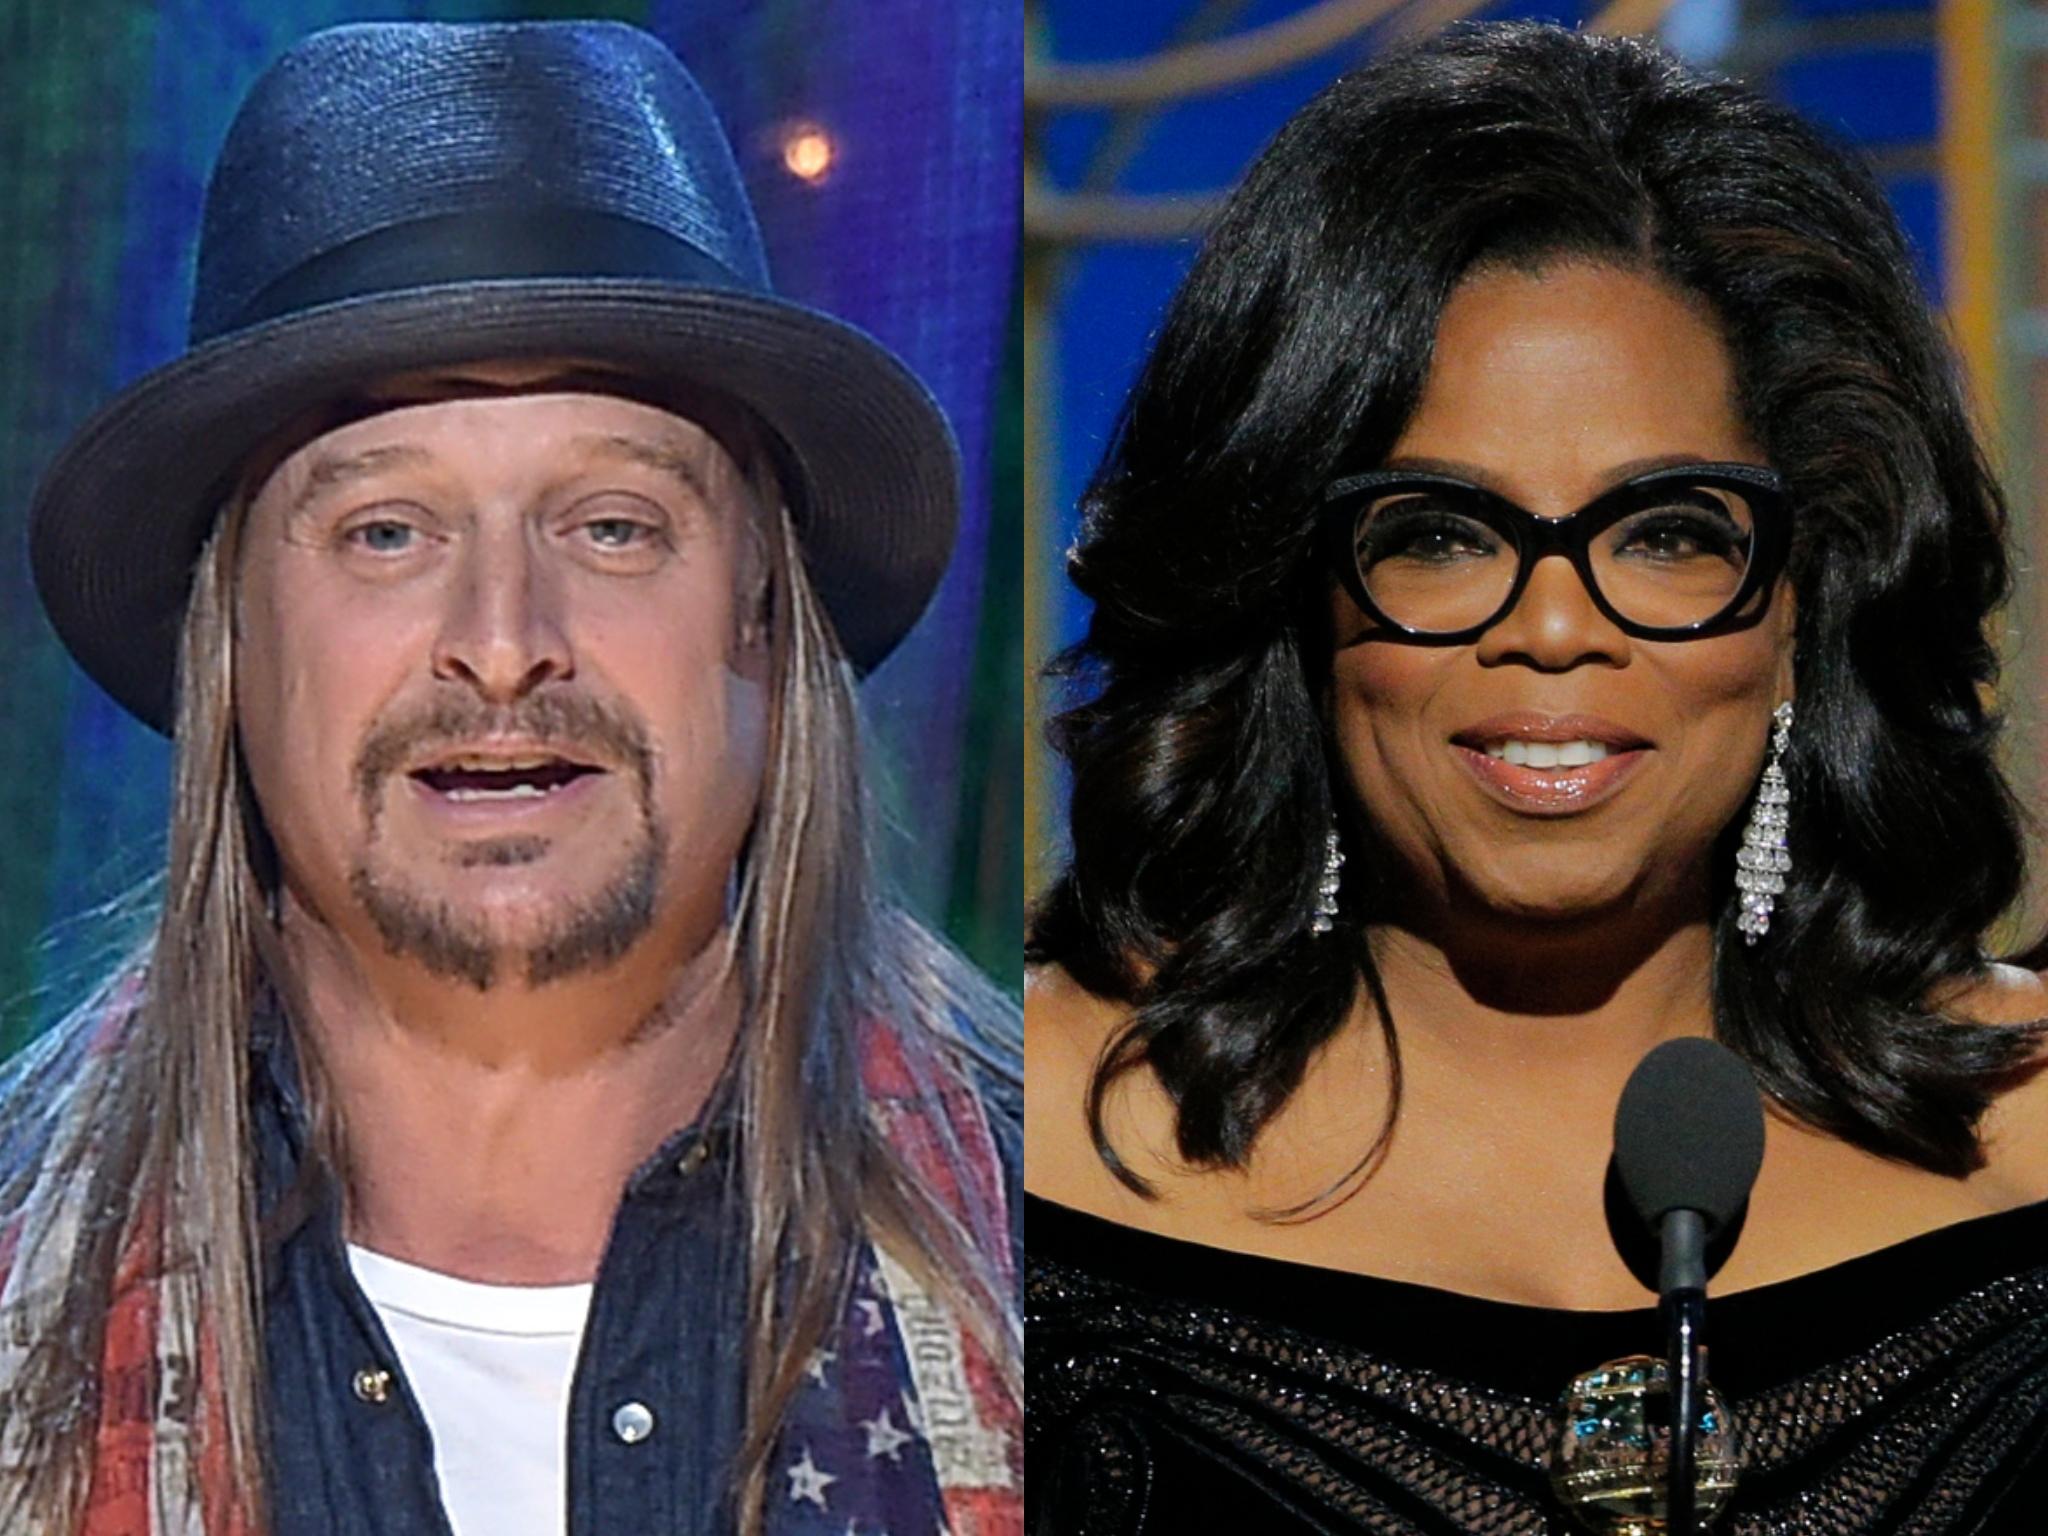 F*** her Kid Rock escorted off stage after drunken rant about Oprah Winfrey The Independent The Independent